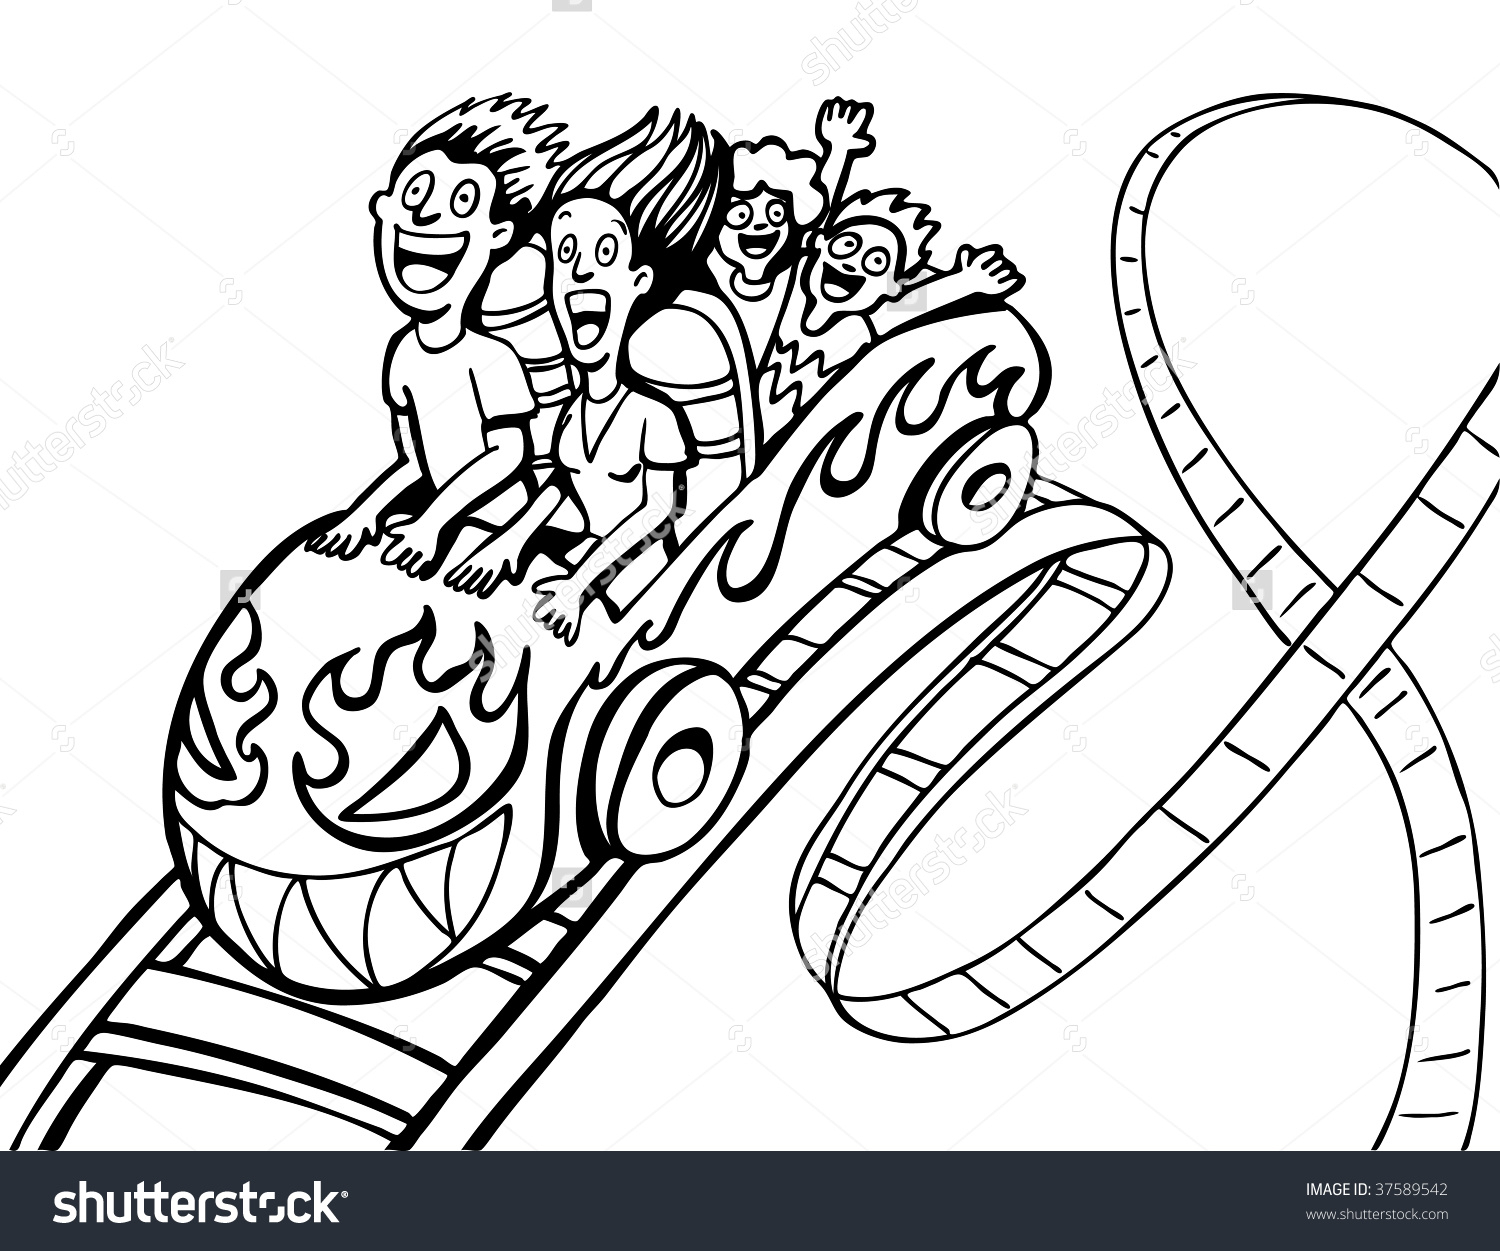 Roller Coaster Sketch at PaintingValley.com | Explore collection of ...